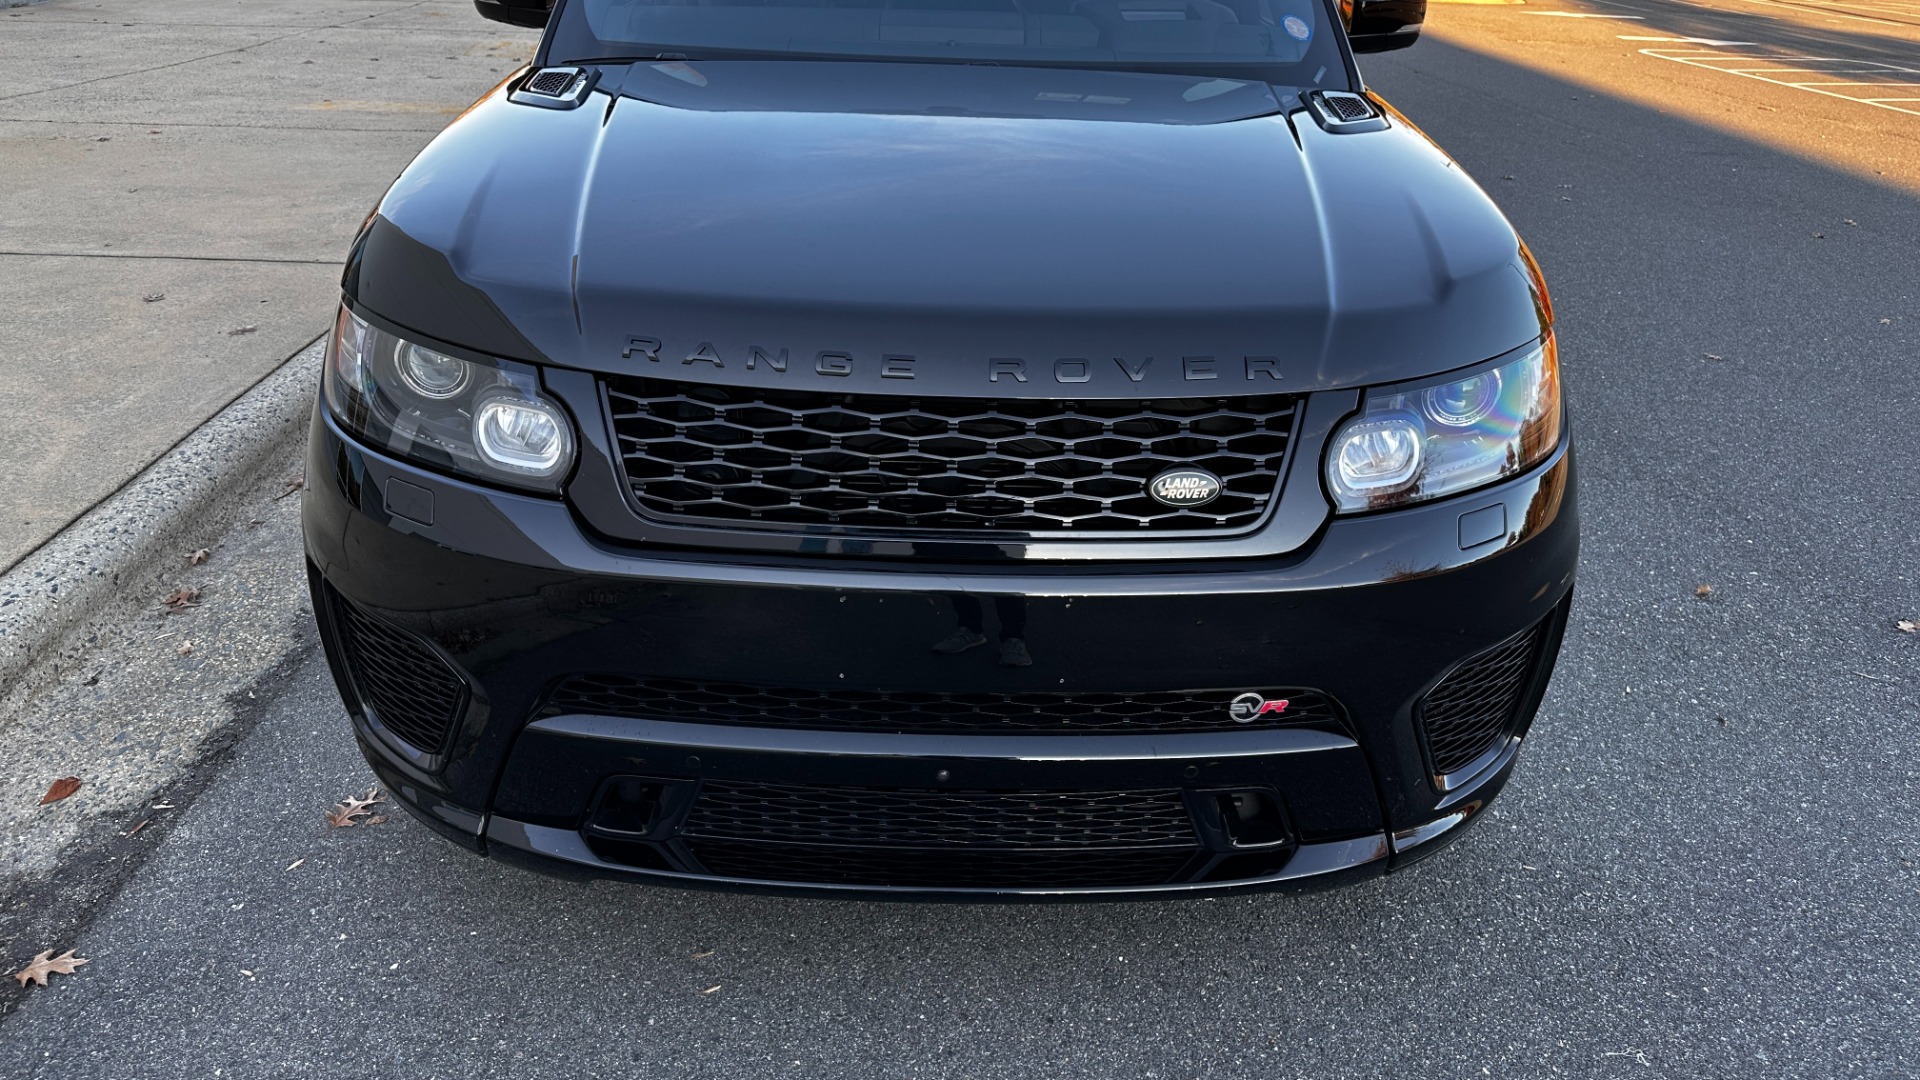 Used 2017 Land Rover Range Rover Sport SVR / DRIVE PRO PACKAGE / MERIDIAN SURROUND SOUND / SUPERCHARGED V8 / PANOR for sale Sold at Formula Imports in Charlotte NC 28227 8